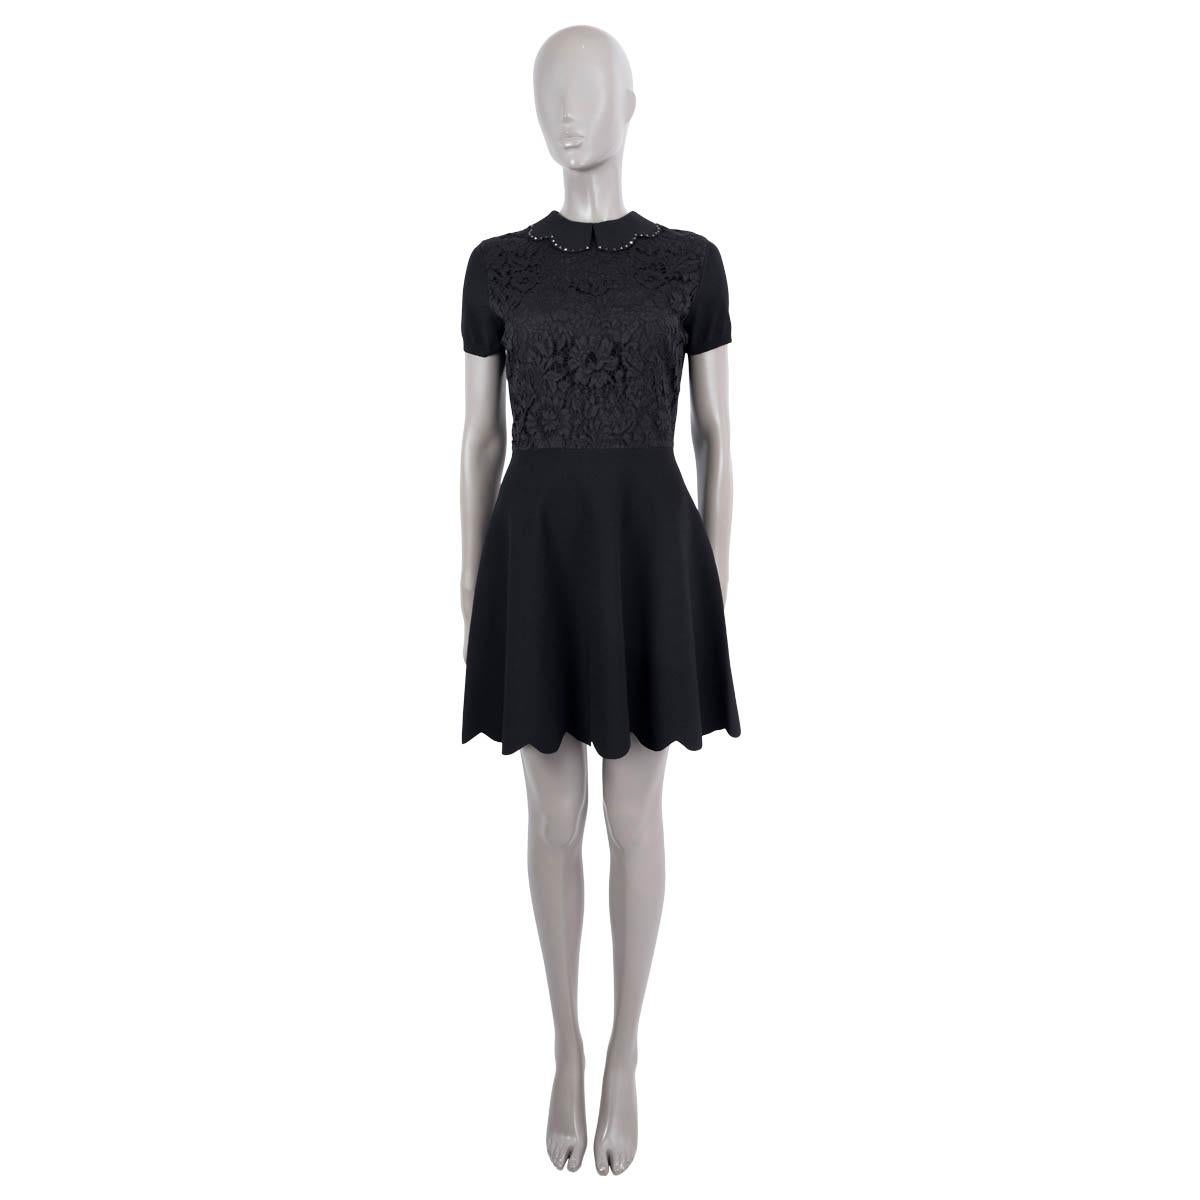 100% authentic Valentino short sleeve mini dress in black viscose (83%) and polyester (17%) with a lace top part and black Rockstud embellished scalloped peter pan collar and hem. Opens with a hidden back zipper. Lined in silk (91%) and elastane